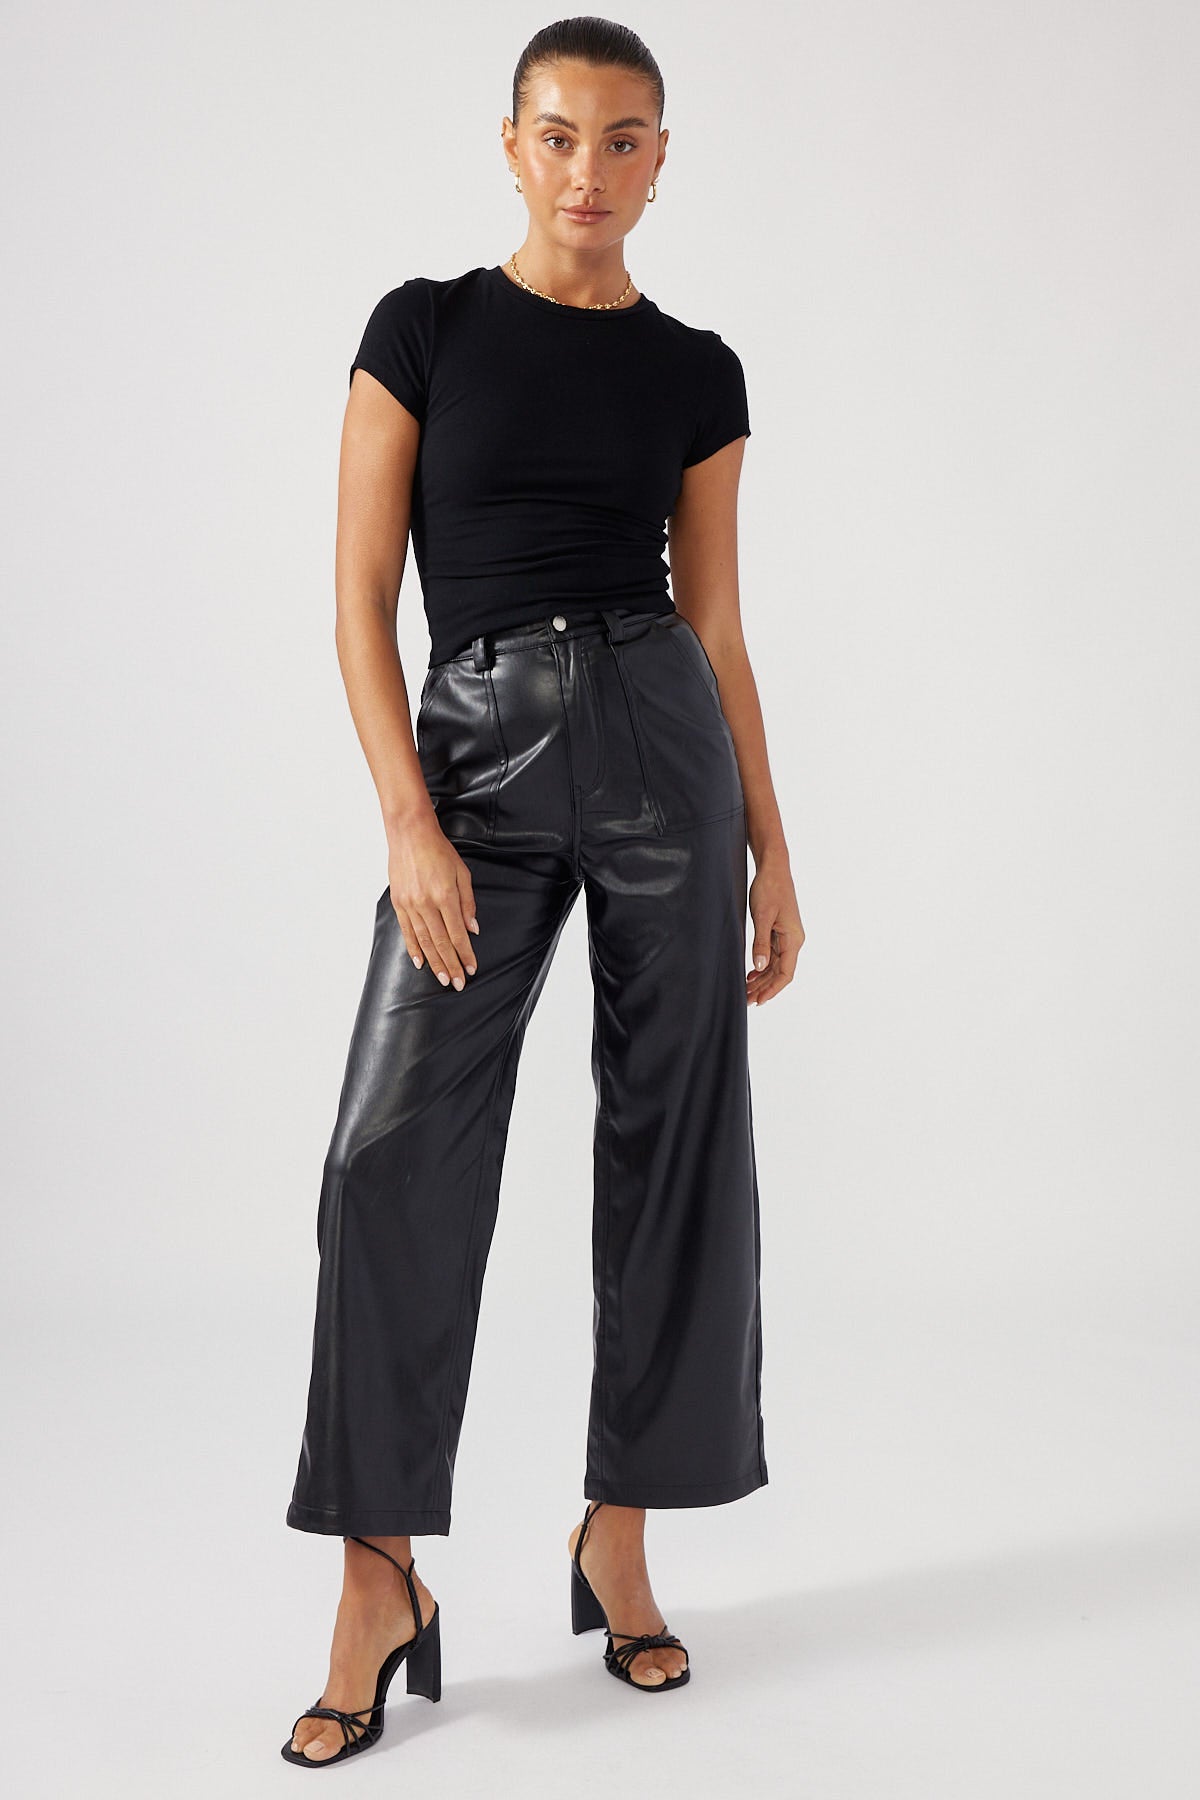 Perfect Stranger Over Now Faux Leather Pant BLACK